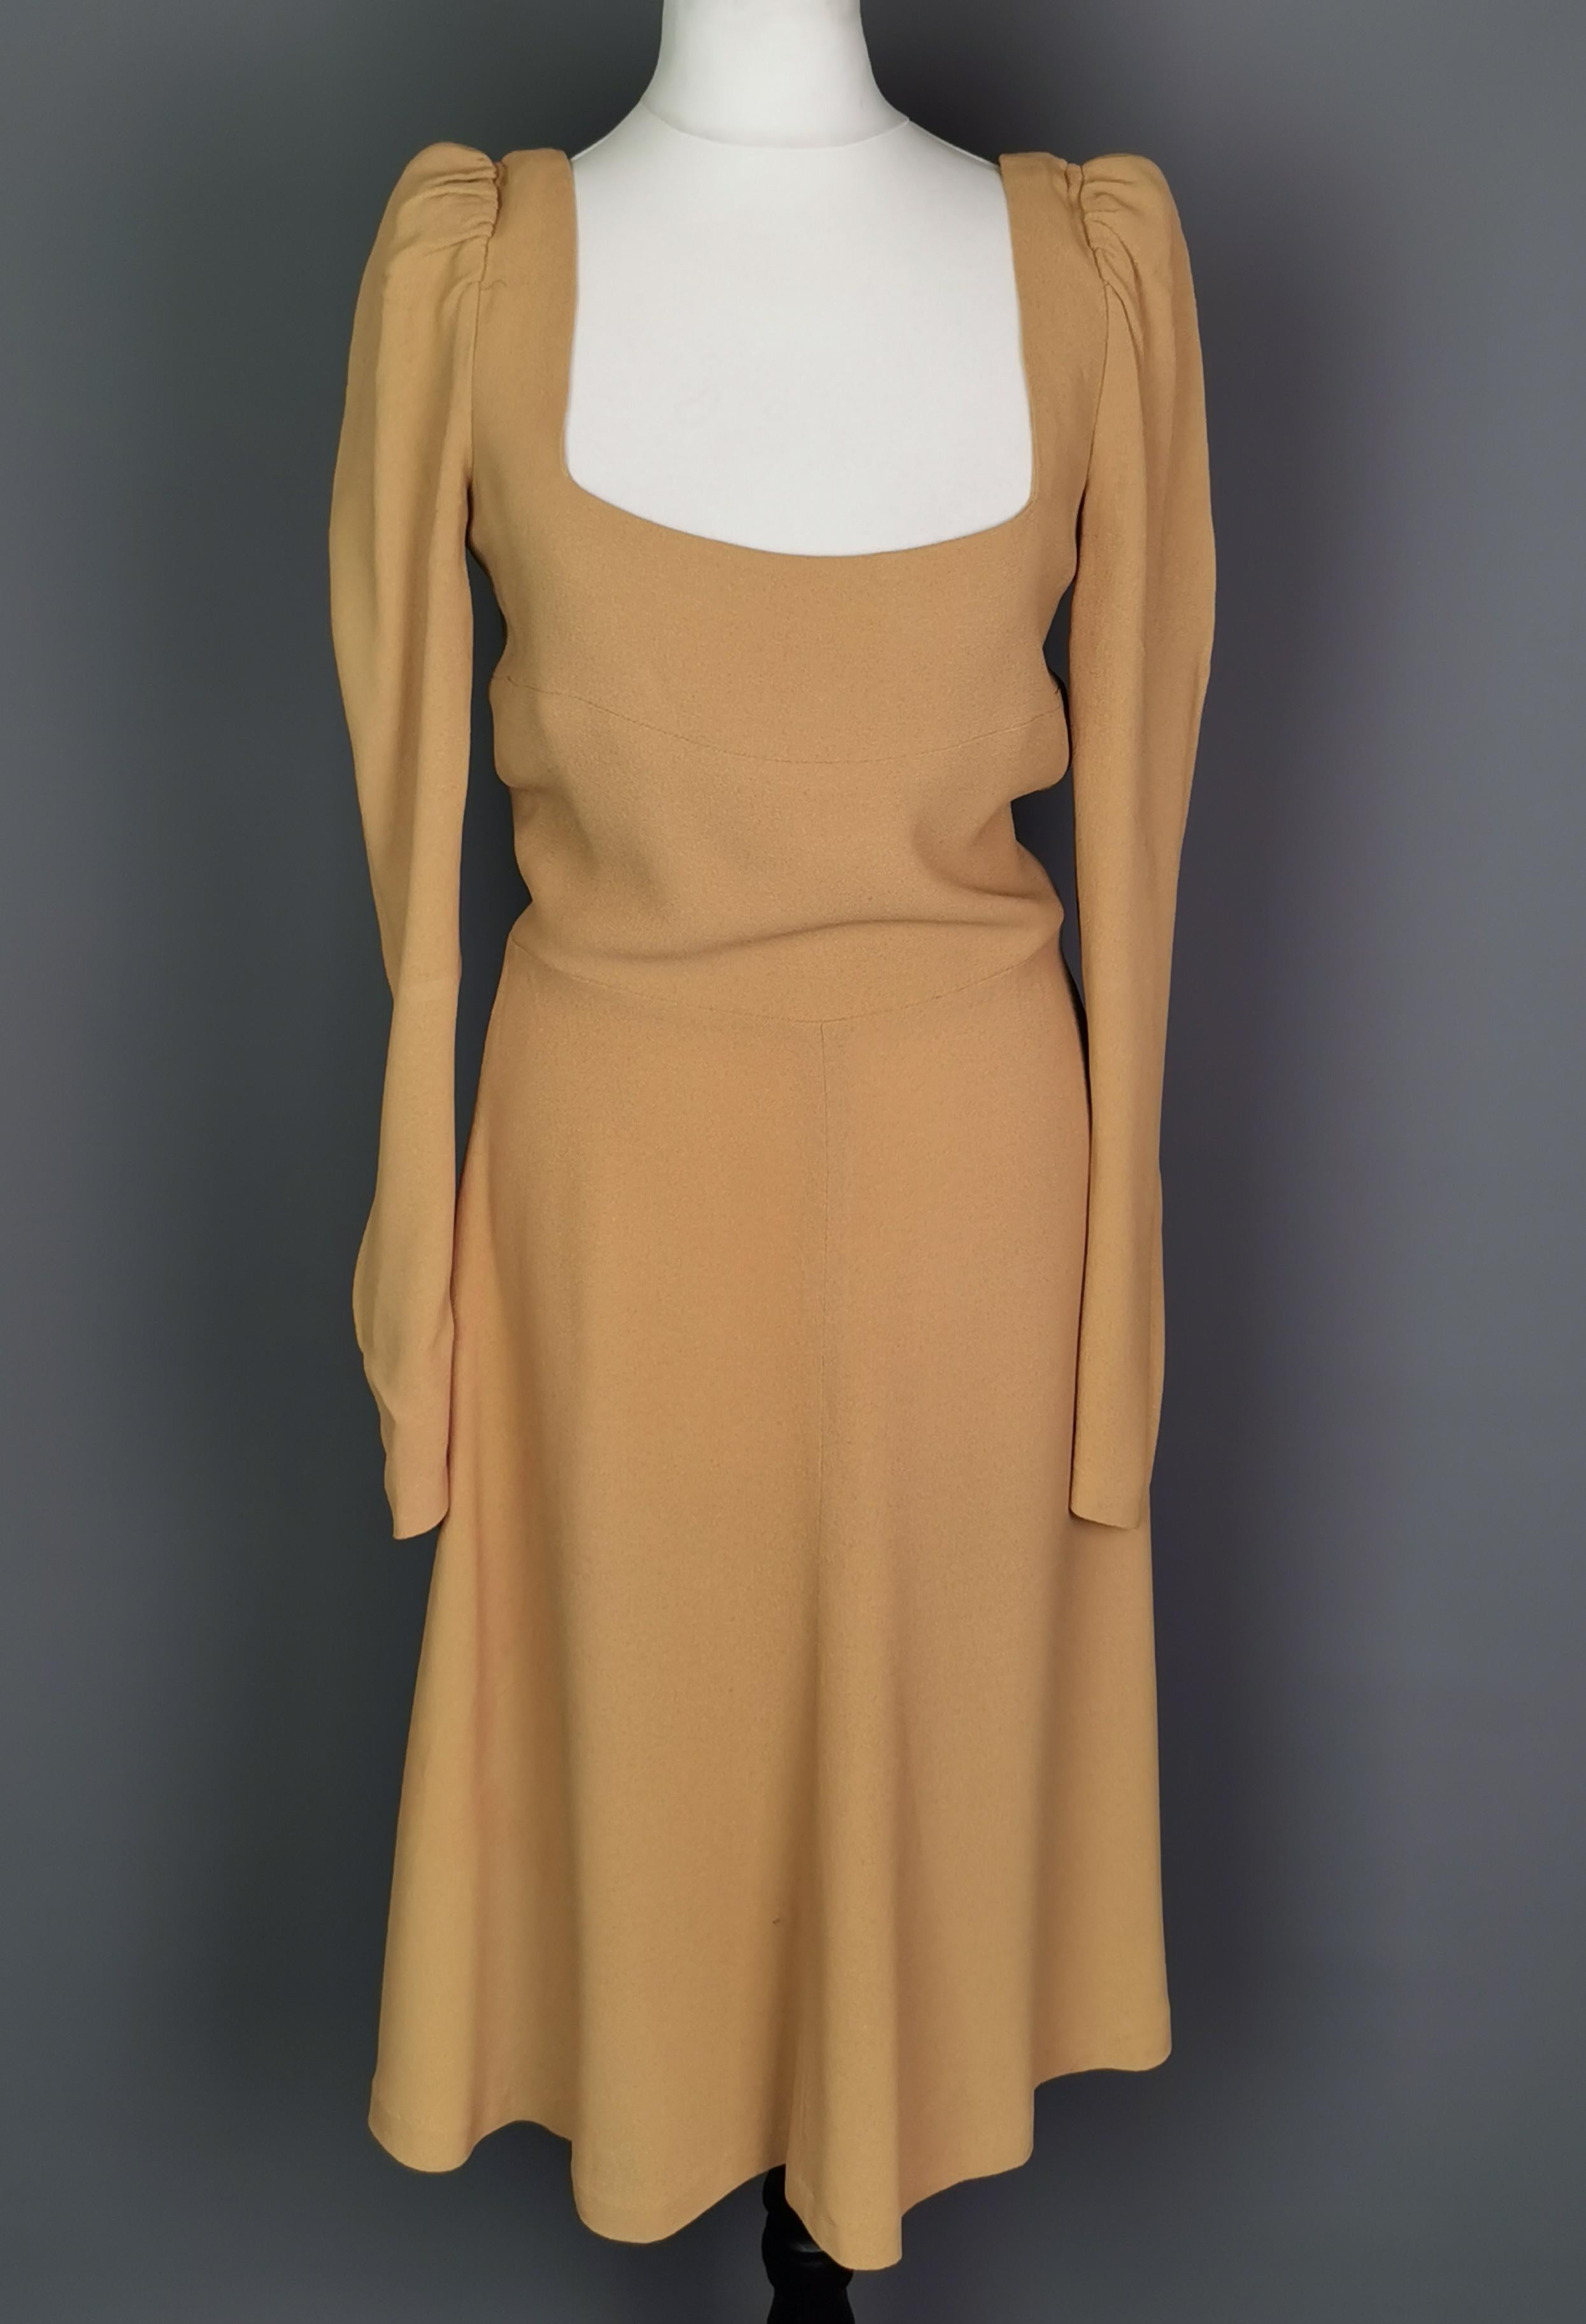 A gorgeous, stunning, rare vintage Biba original 1970s mini dress.

This dress was created at the height of Bibas popularity and the time they produced some of their most iconic designs.

This deep mustard crepe mini dress has long tapered sleeves,